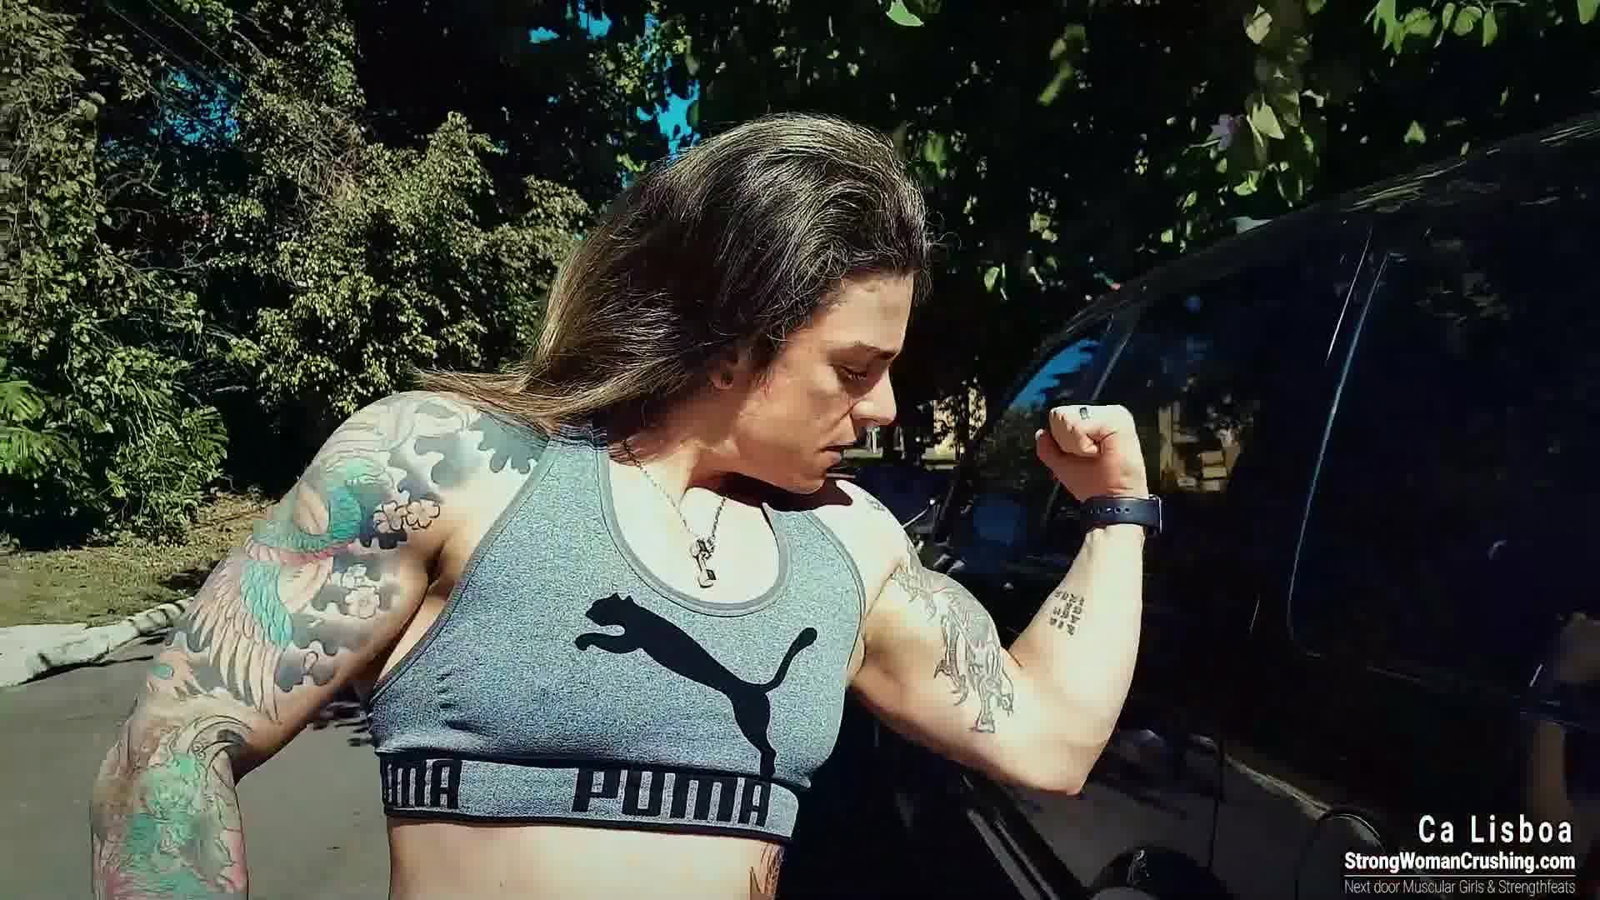 Photo by MusclegirlStrength with the username @MusclegirlStrength, who is a brand user,  March 1, 2024 at 9:13 PM and the text says 'Watch Ca Lisboa Crush It: Lifting a Heavy Pickup Truck Challenge!
Full Video: https://bit.ly/3HaVrMr

Enter the world of powerhouse women - witness muscular girls showcasing their strength, bending metal, lifting cars, and flexing their biceps with..'